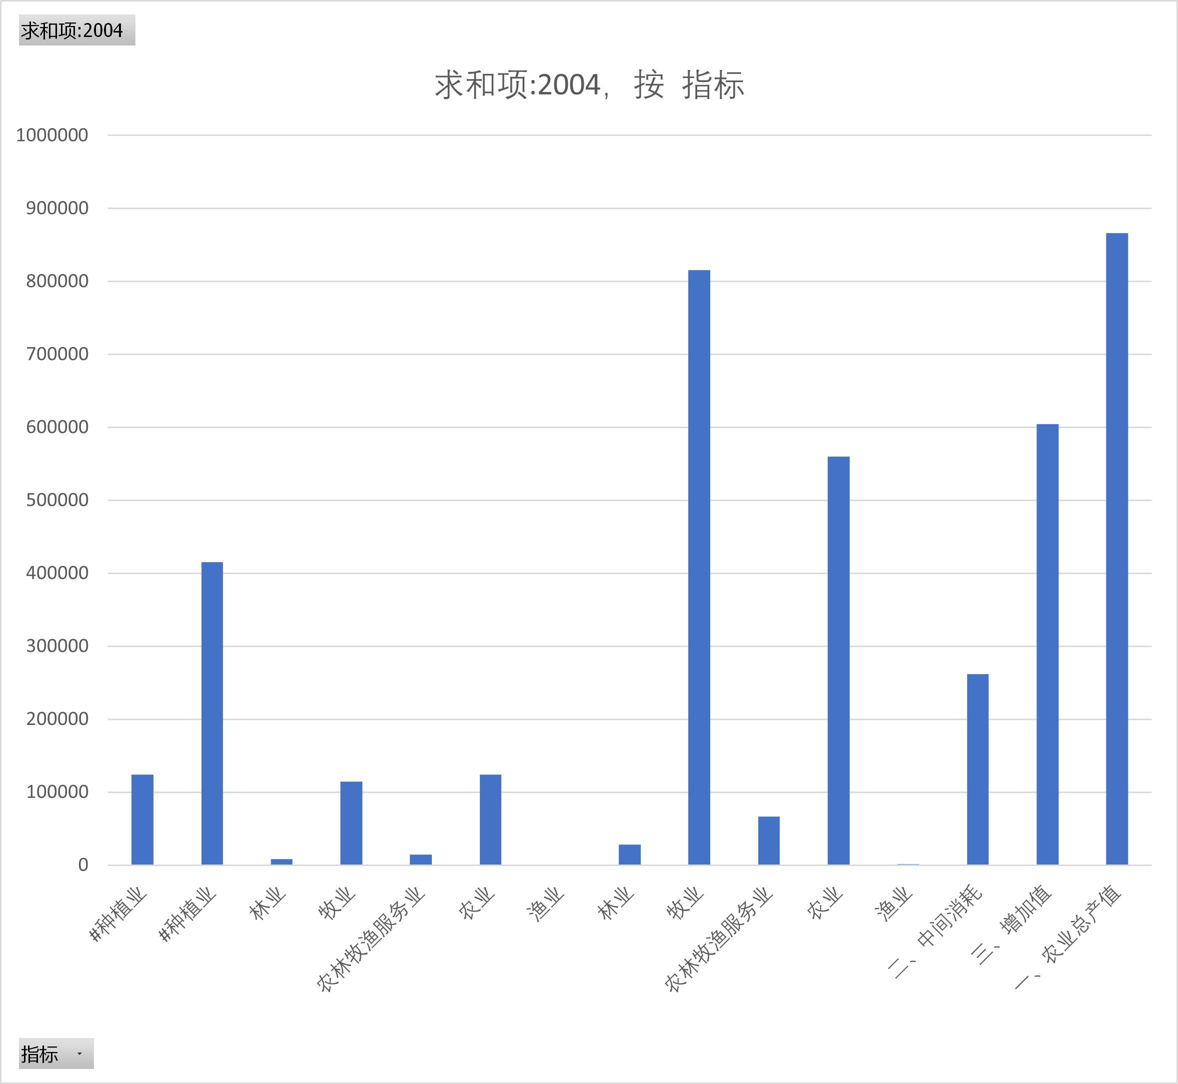 Agricultural added value of sub projects in Qinghai Province (1997-2005)